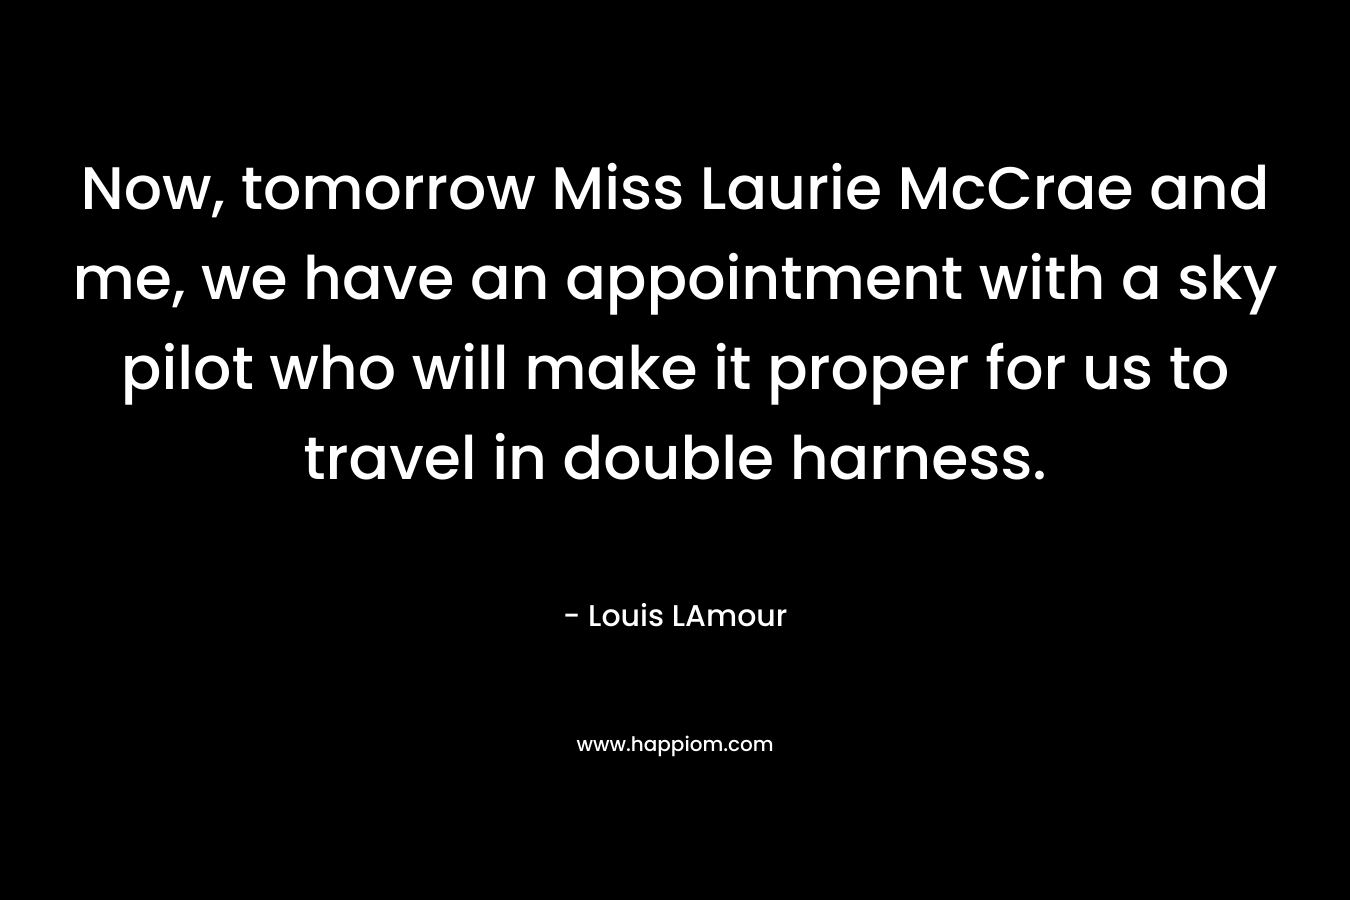 Now, tomorrow Miss Laurie McCrae and me, we have an appointment with a sky pilot who will make it proper for us to travel in double harness. – Louis LAmour